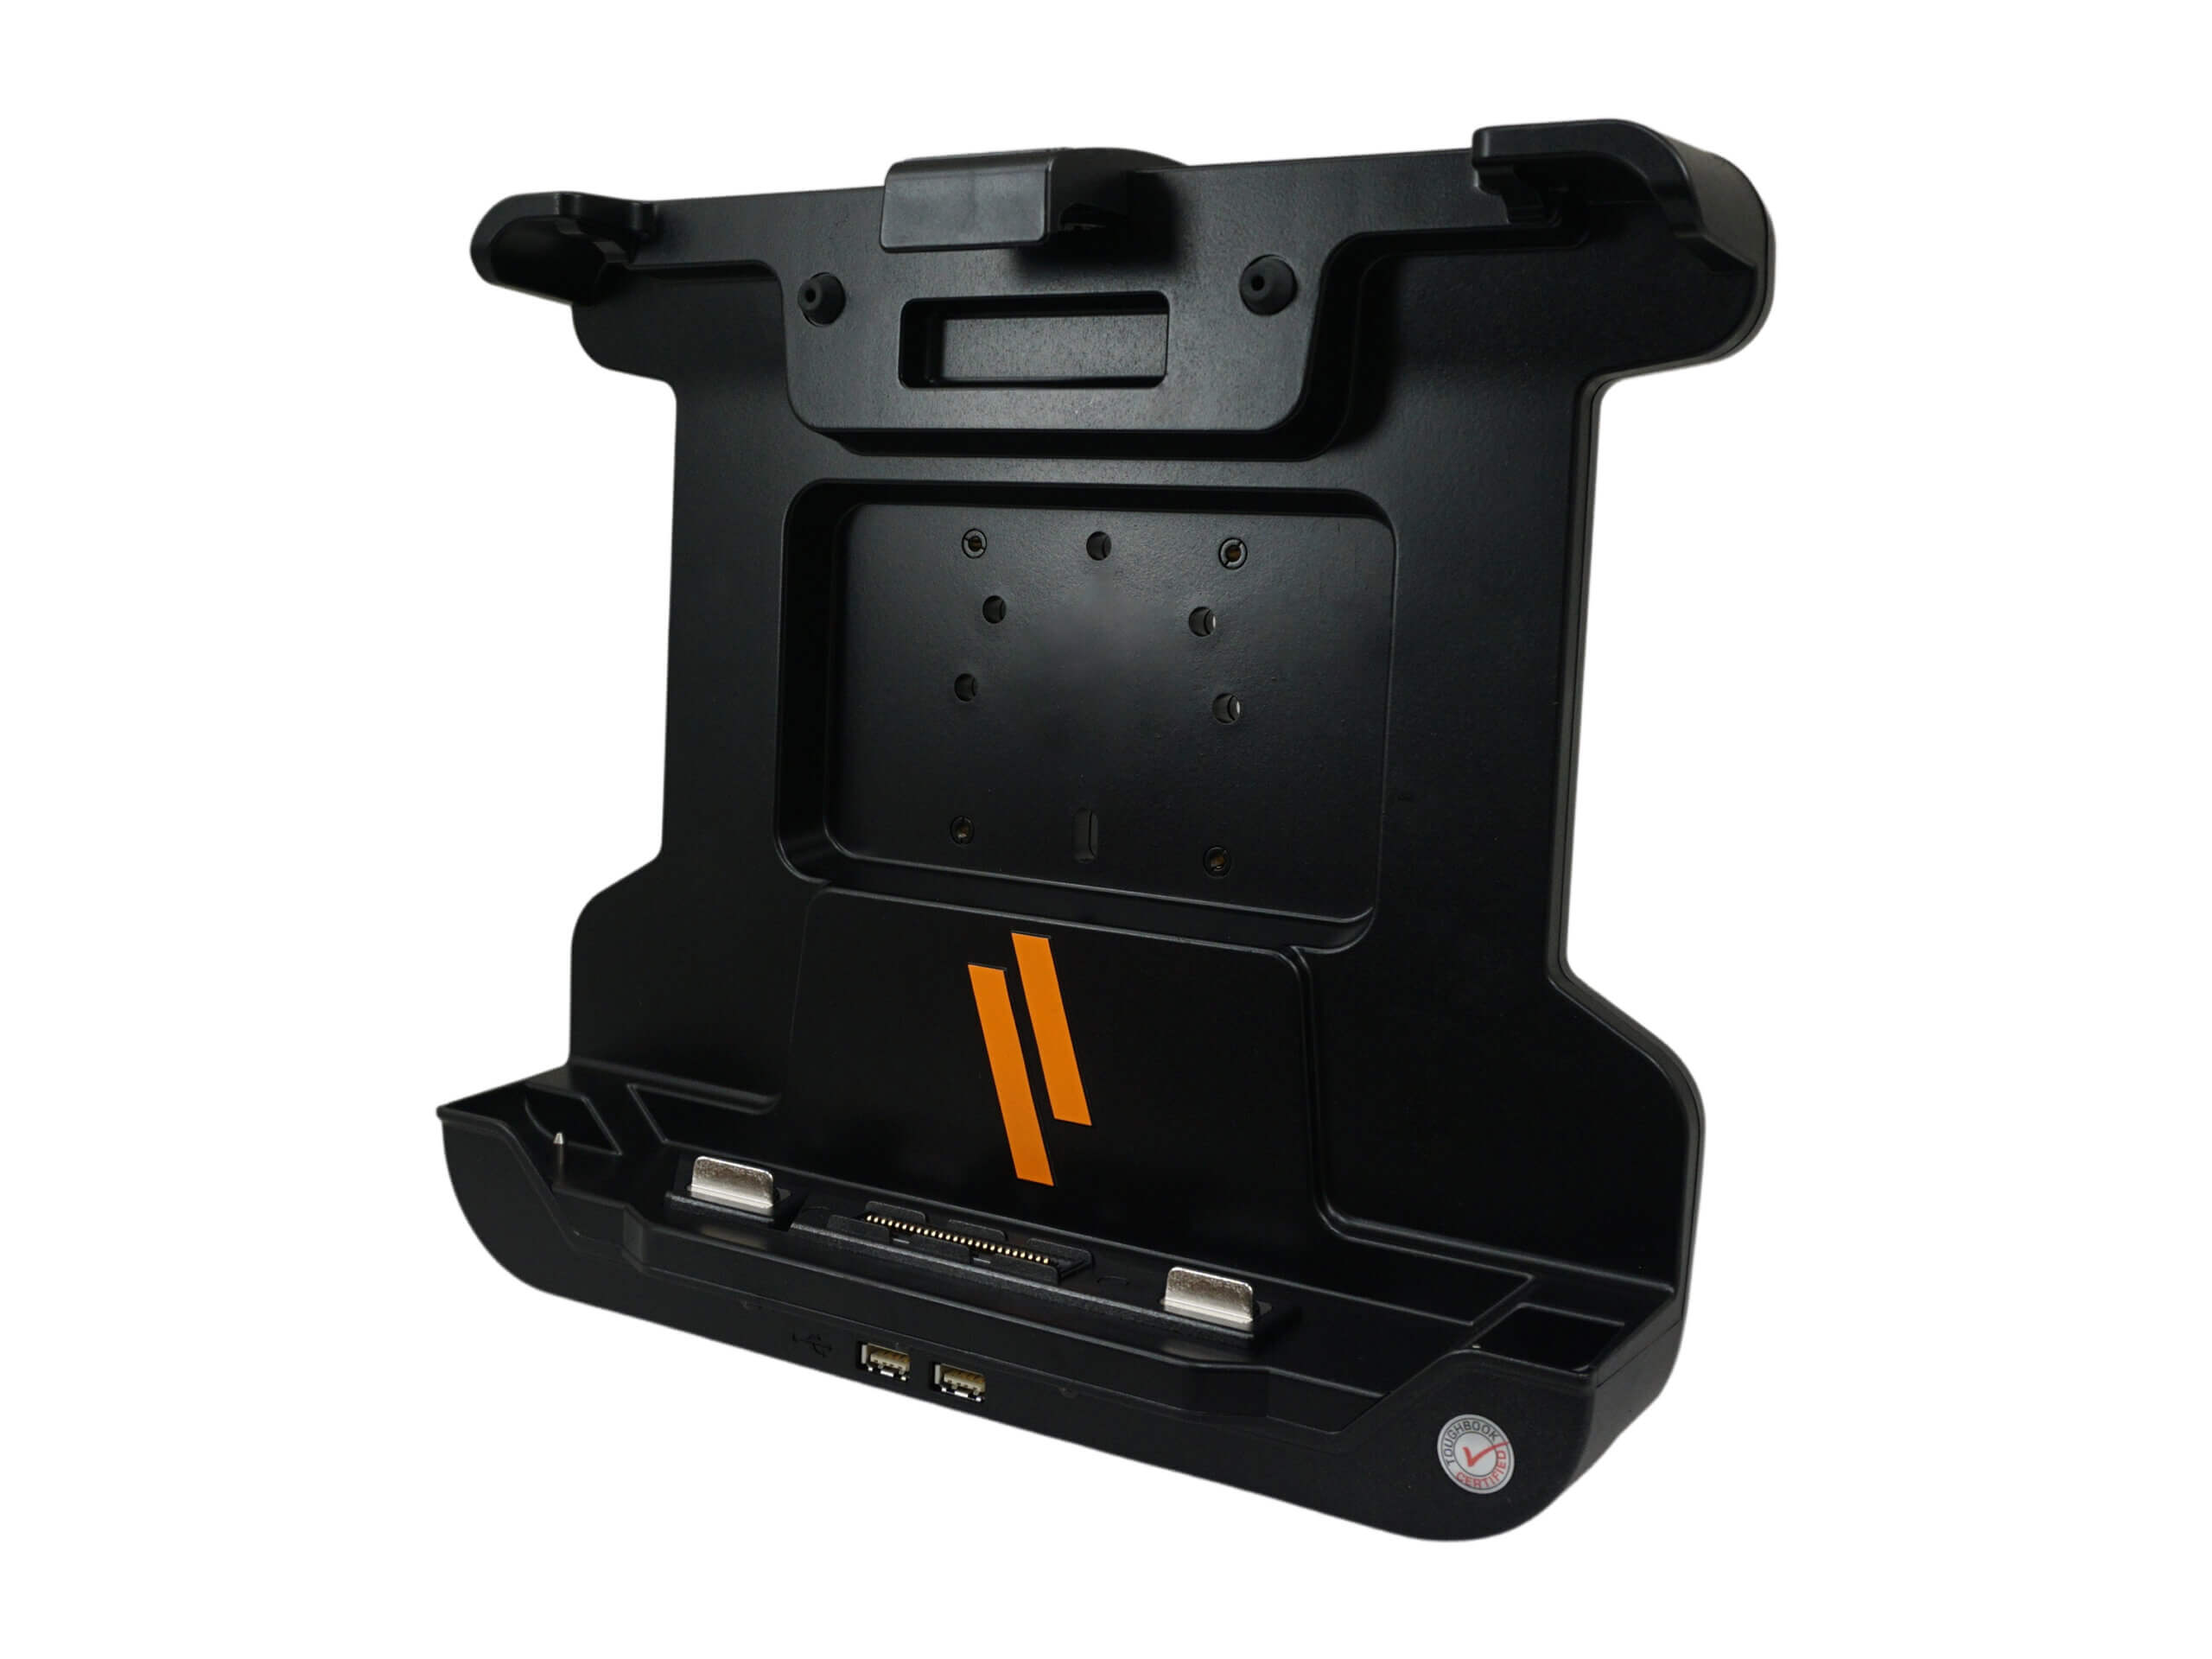 Docking Station For Panasonic TOUGHBOOK 33 Tablet with Advanced Port Replication